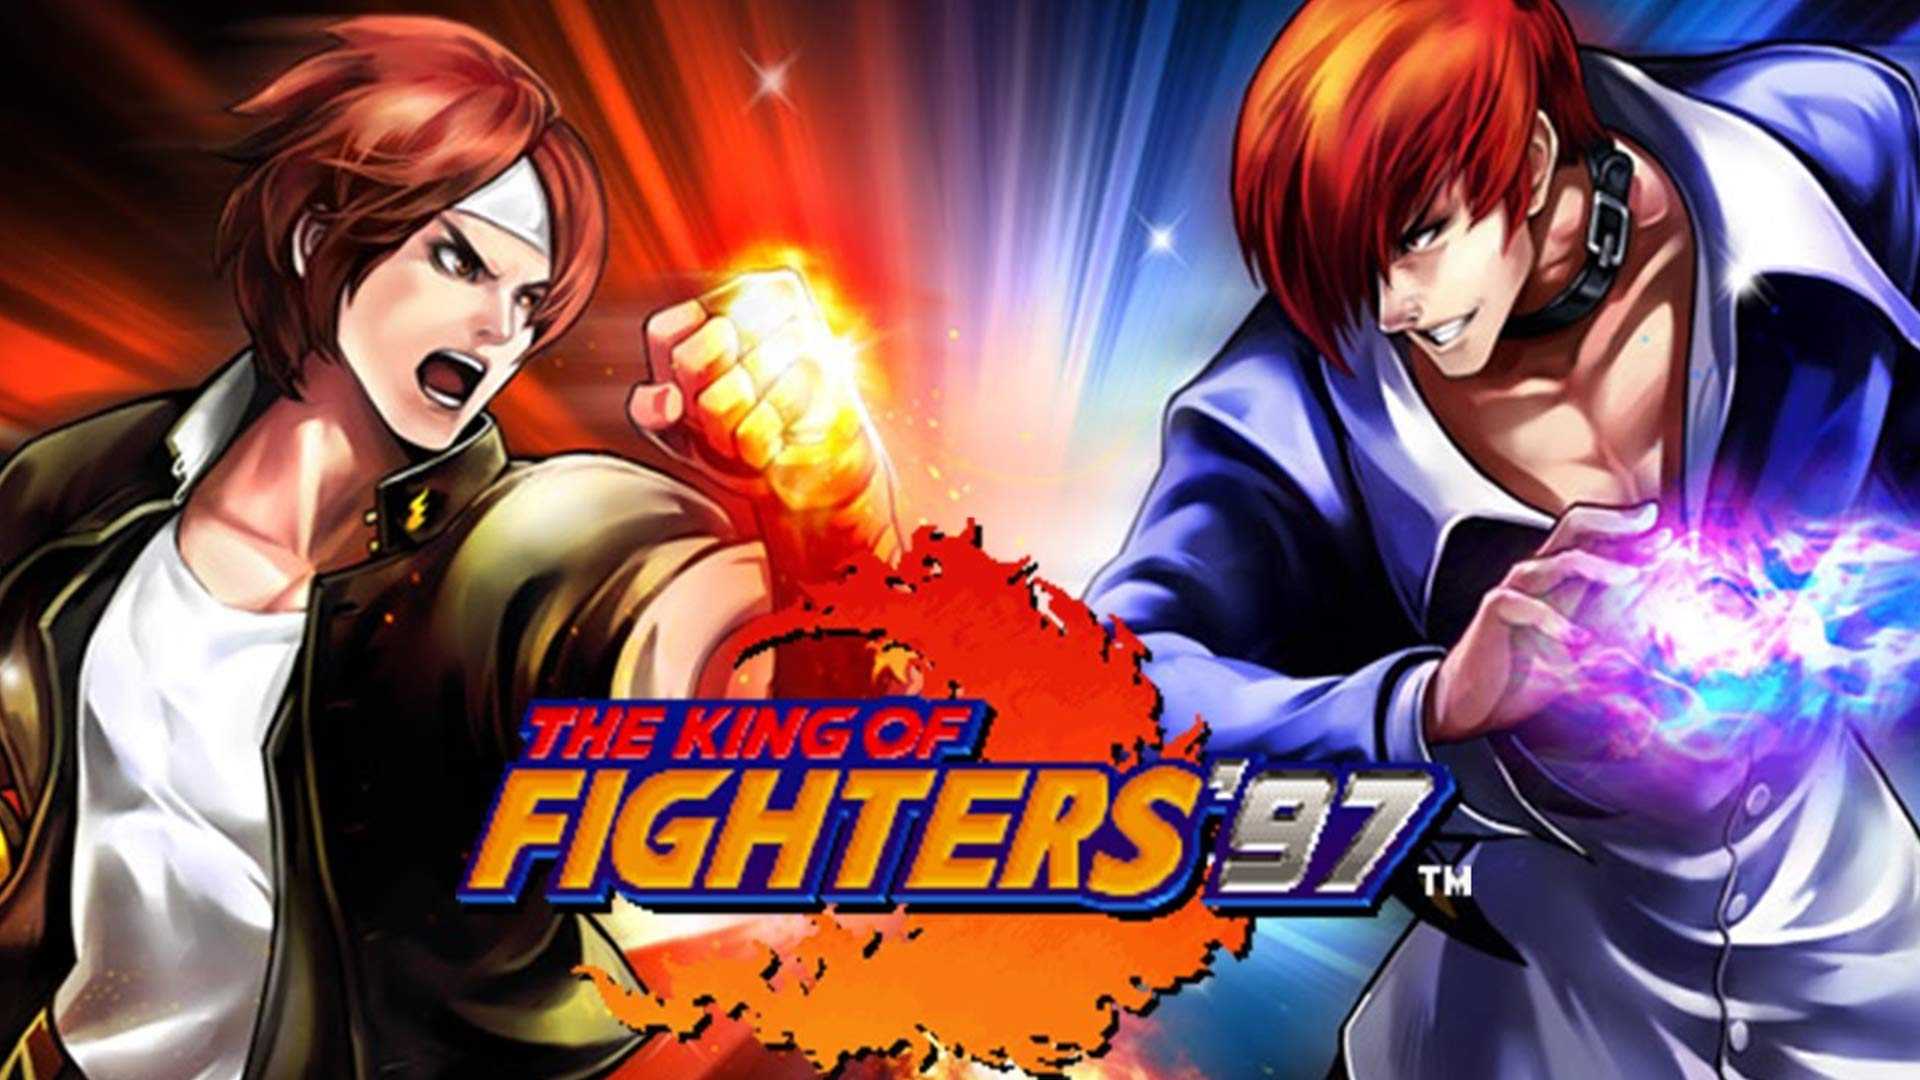 The King of Fighters '97 Global Match Hits Sony Audiences Soon, Includes Cross Play